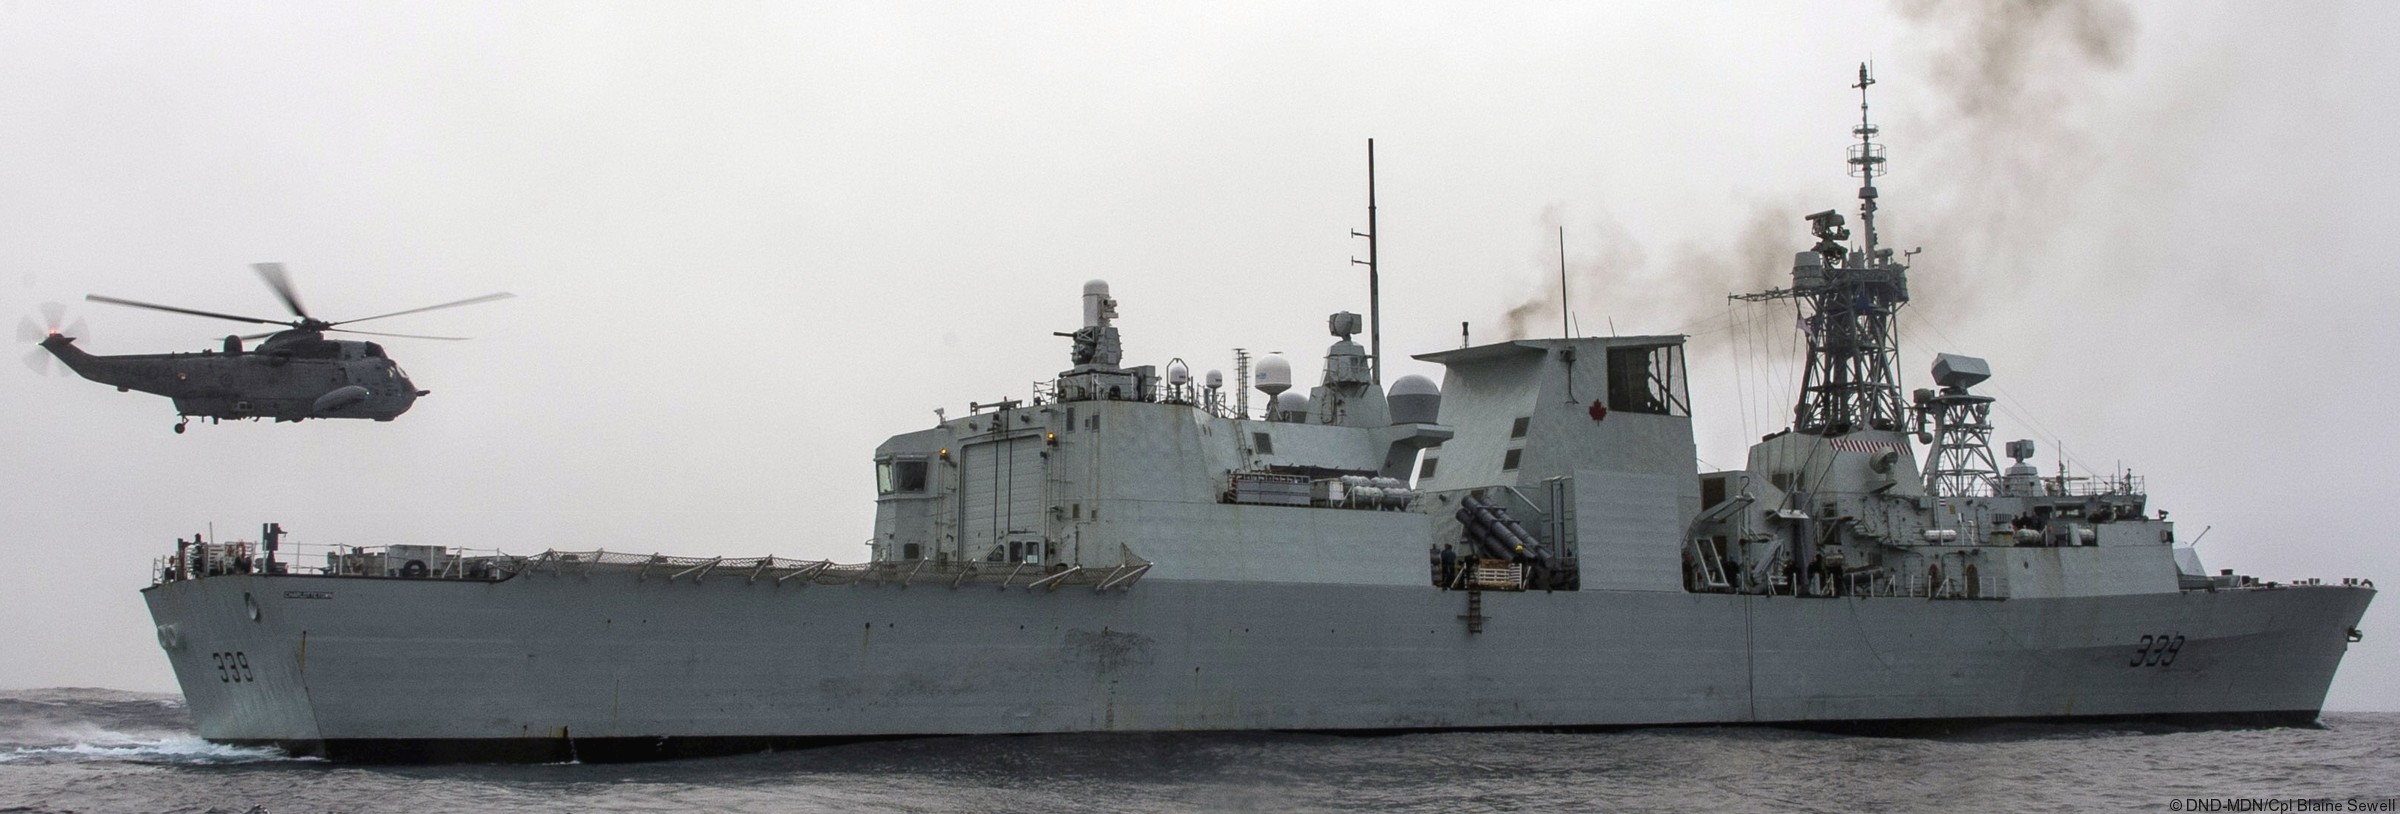 ffh-339 hmcs charlottetown halifax class helicopter patrol frigate ncsm royal canadian navy 26